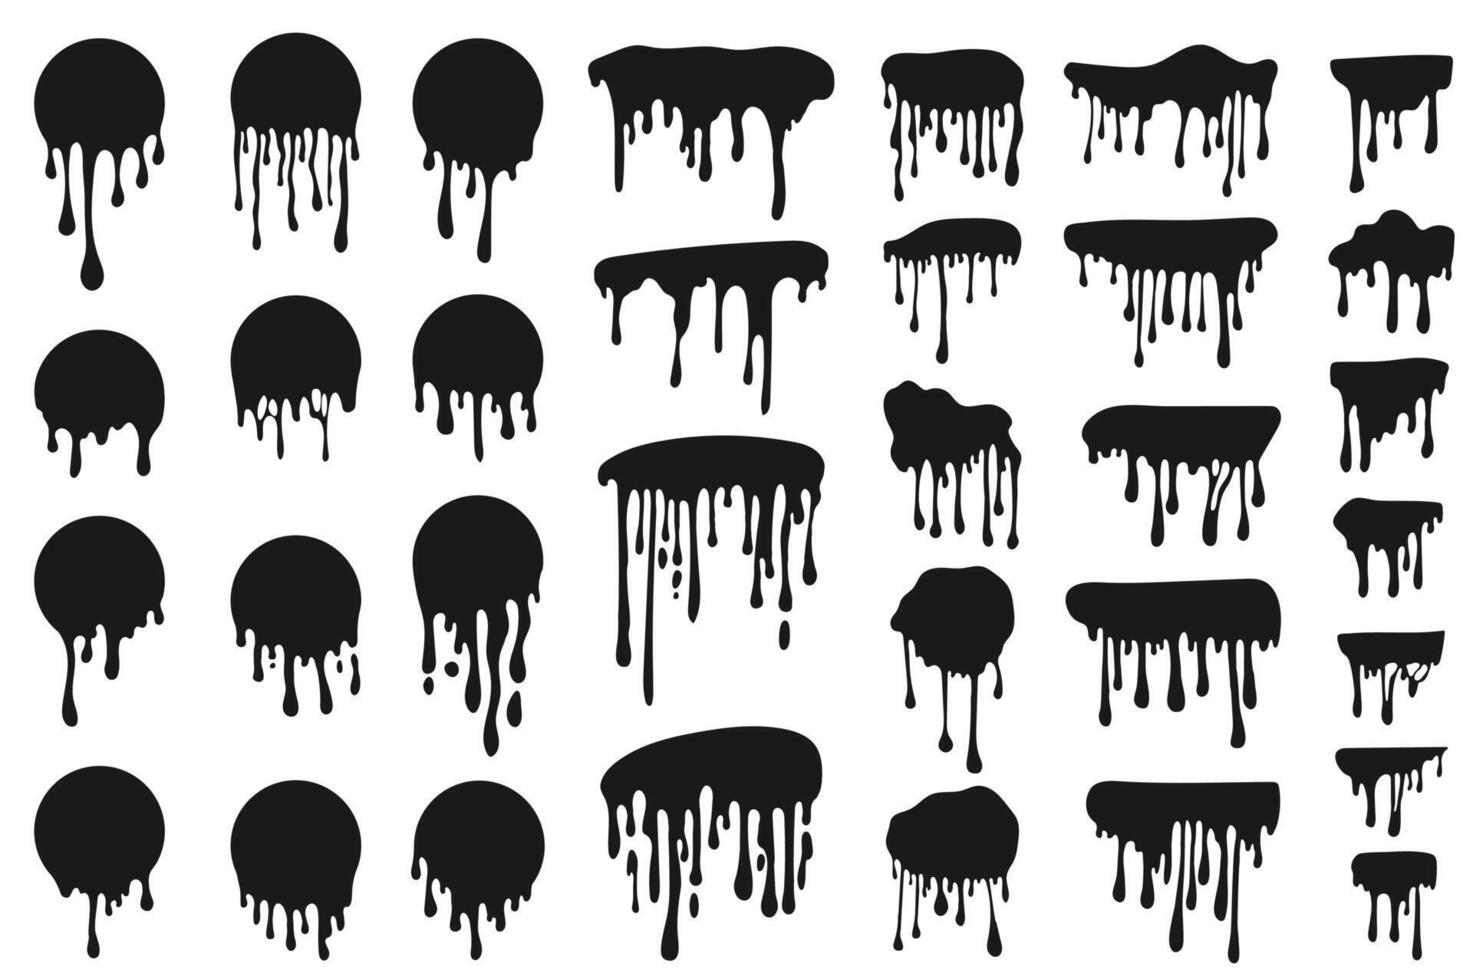 Dripping black ink set graphic elements in flat design. Bundle of different spots with flowing drops of round shape and border templates, liquid paint stains. Vector illustration isolated objects